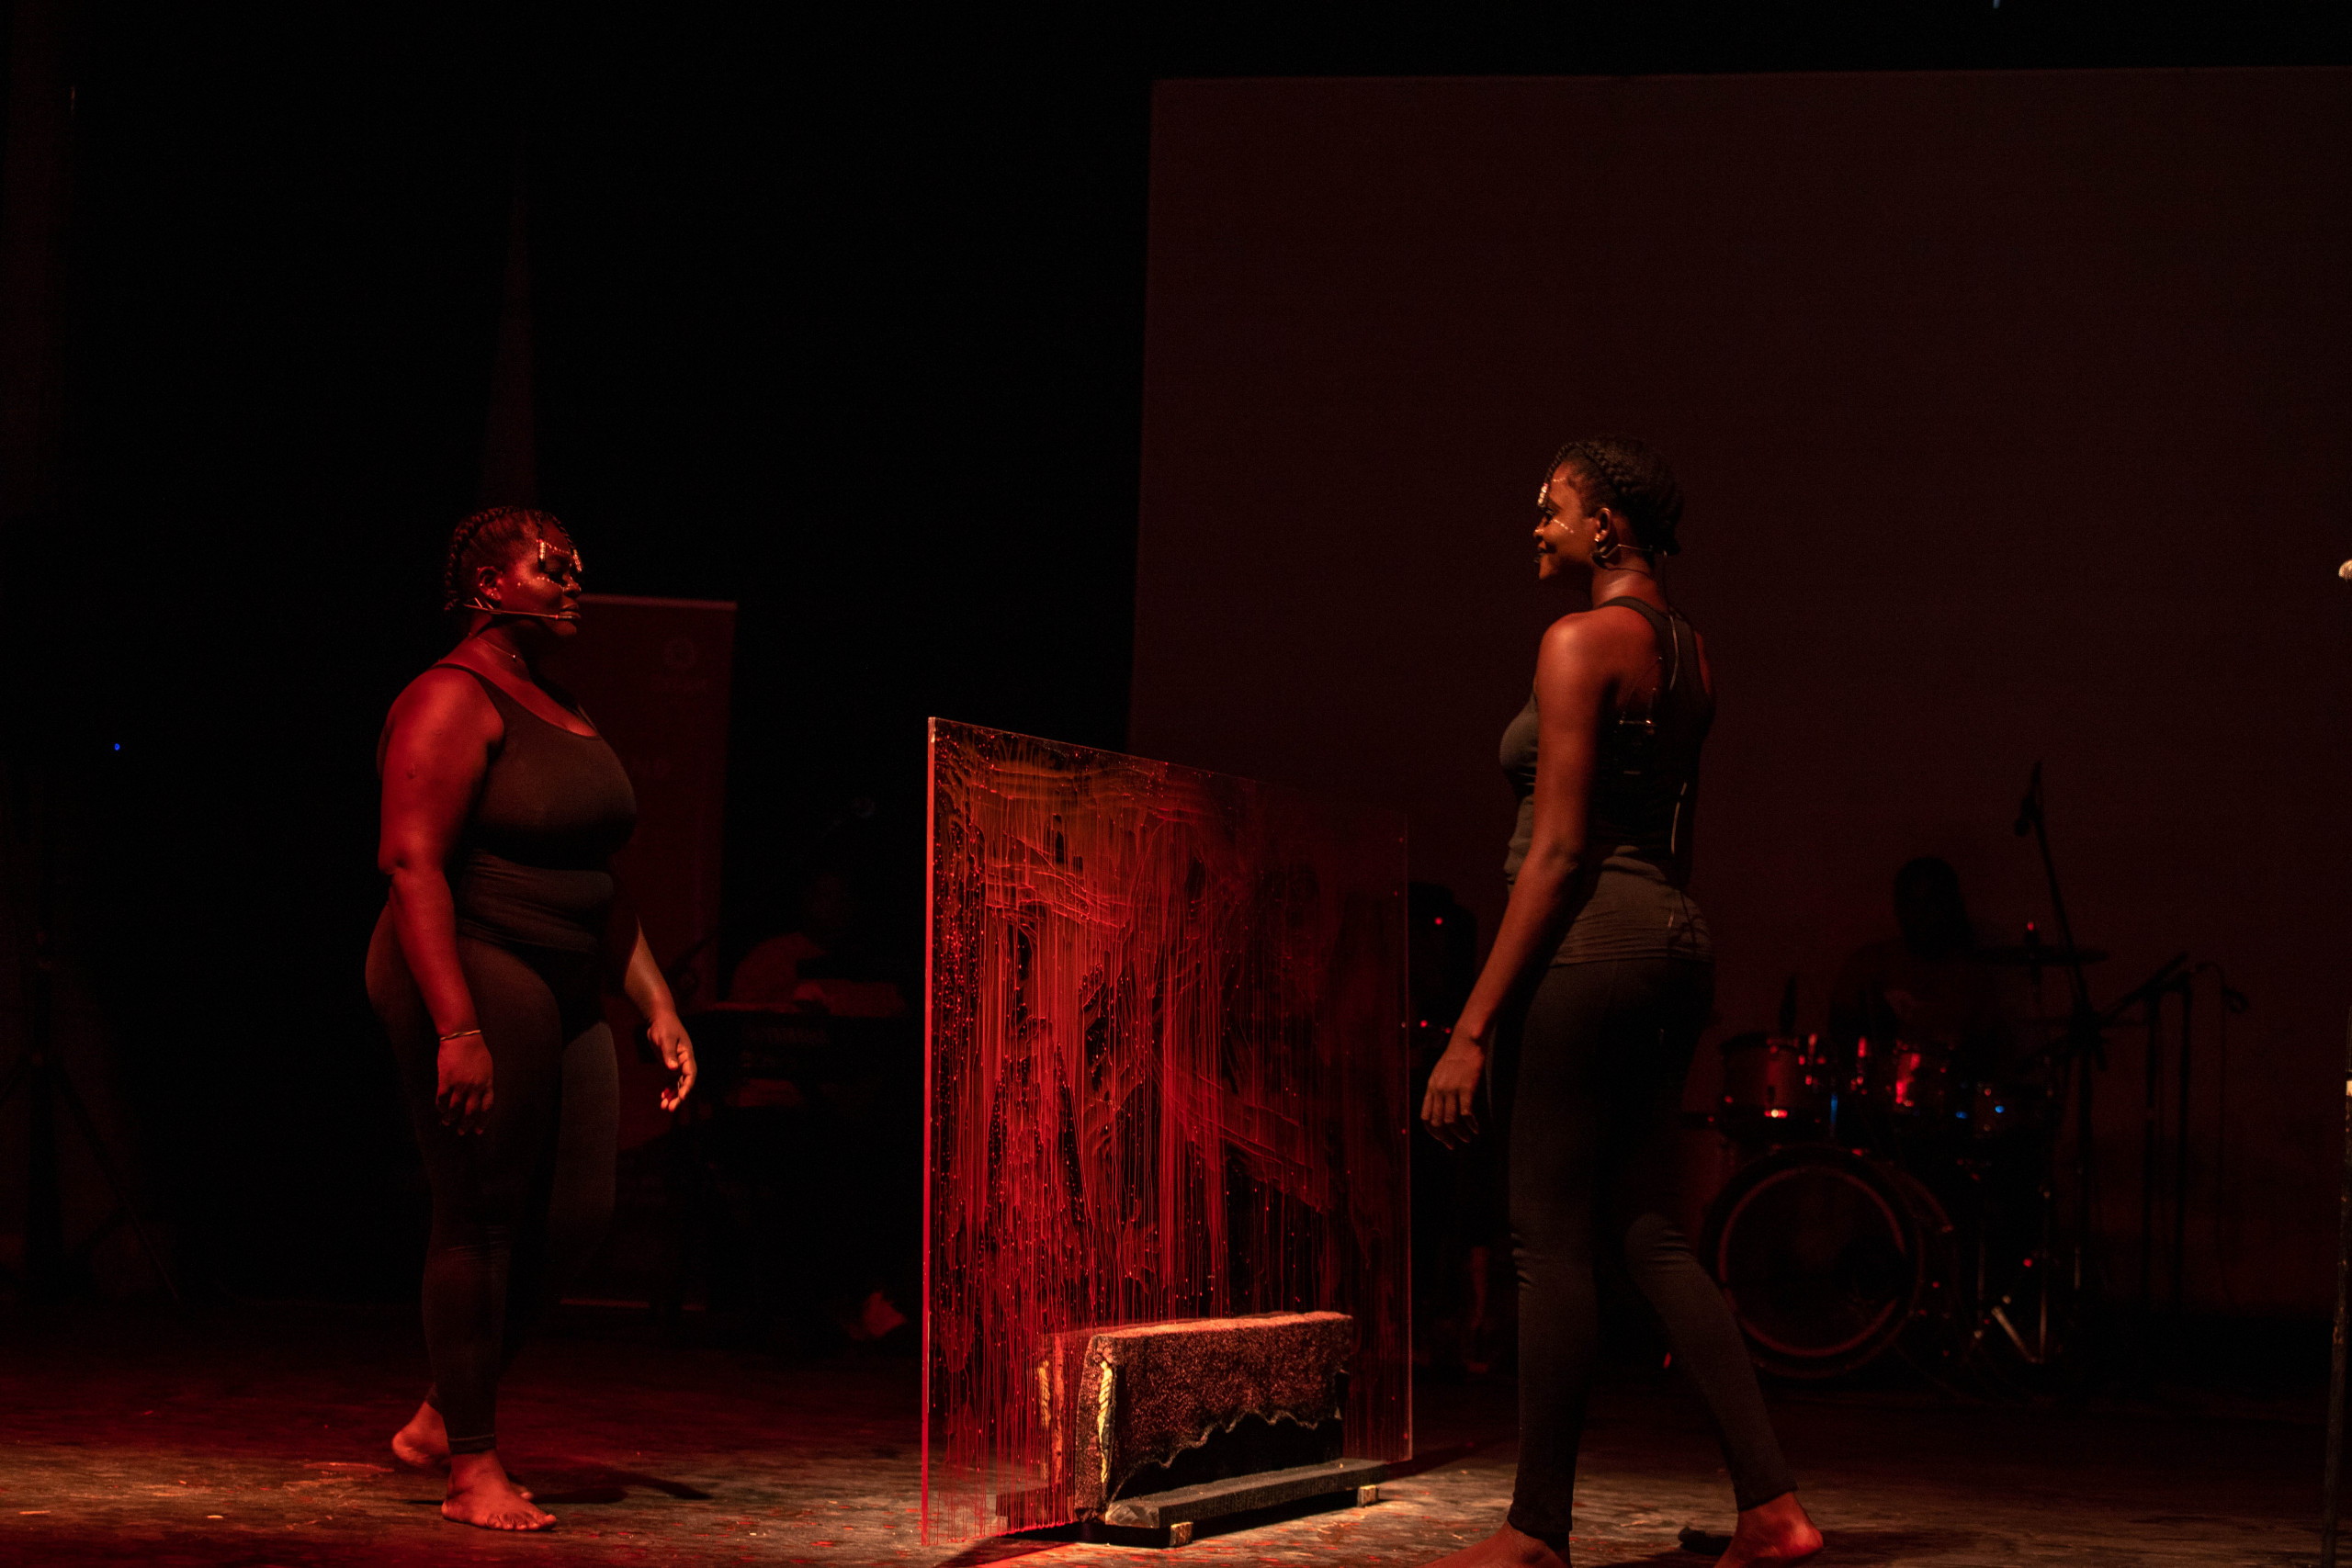 In 2018, Drama Queens staged &#8216;Just Like Us&#8217;, Ghana’s first theatre production centred on the realities of queer lives in Africa, which was met with multiple threats of legal injunctions. They have since successfully staged &#8216;Until Someone Wakes Up&#8217; (2019), &#8216;An African Man&#8217;(2020), &#8216;Ashikishan&#8217;(2021), &#8216;Liberating pleasures&#8217;(2022) and &#8216;Monsoons&#8217;(2022). Image courtesy of Drama Queens.